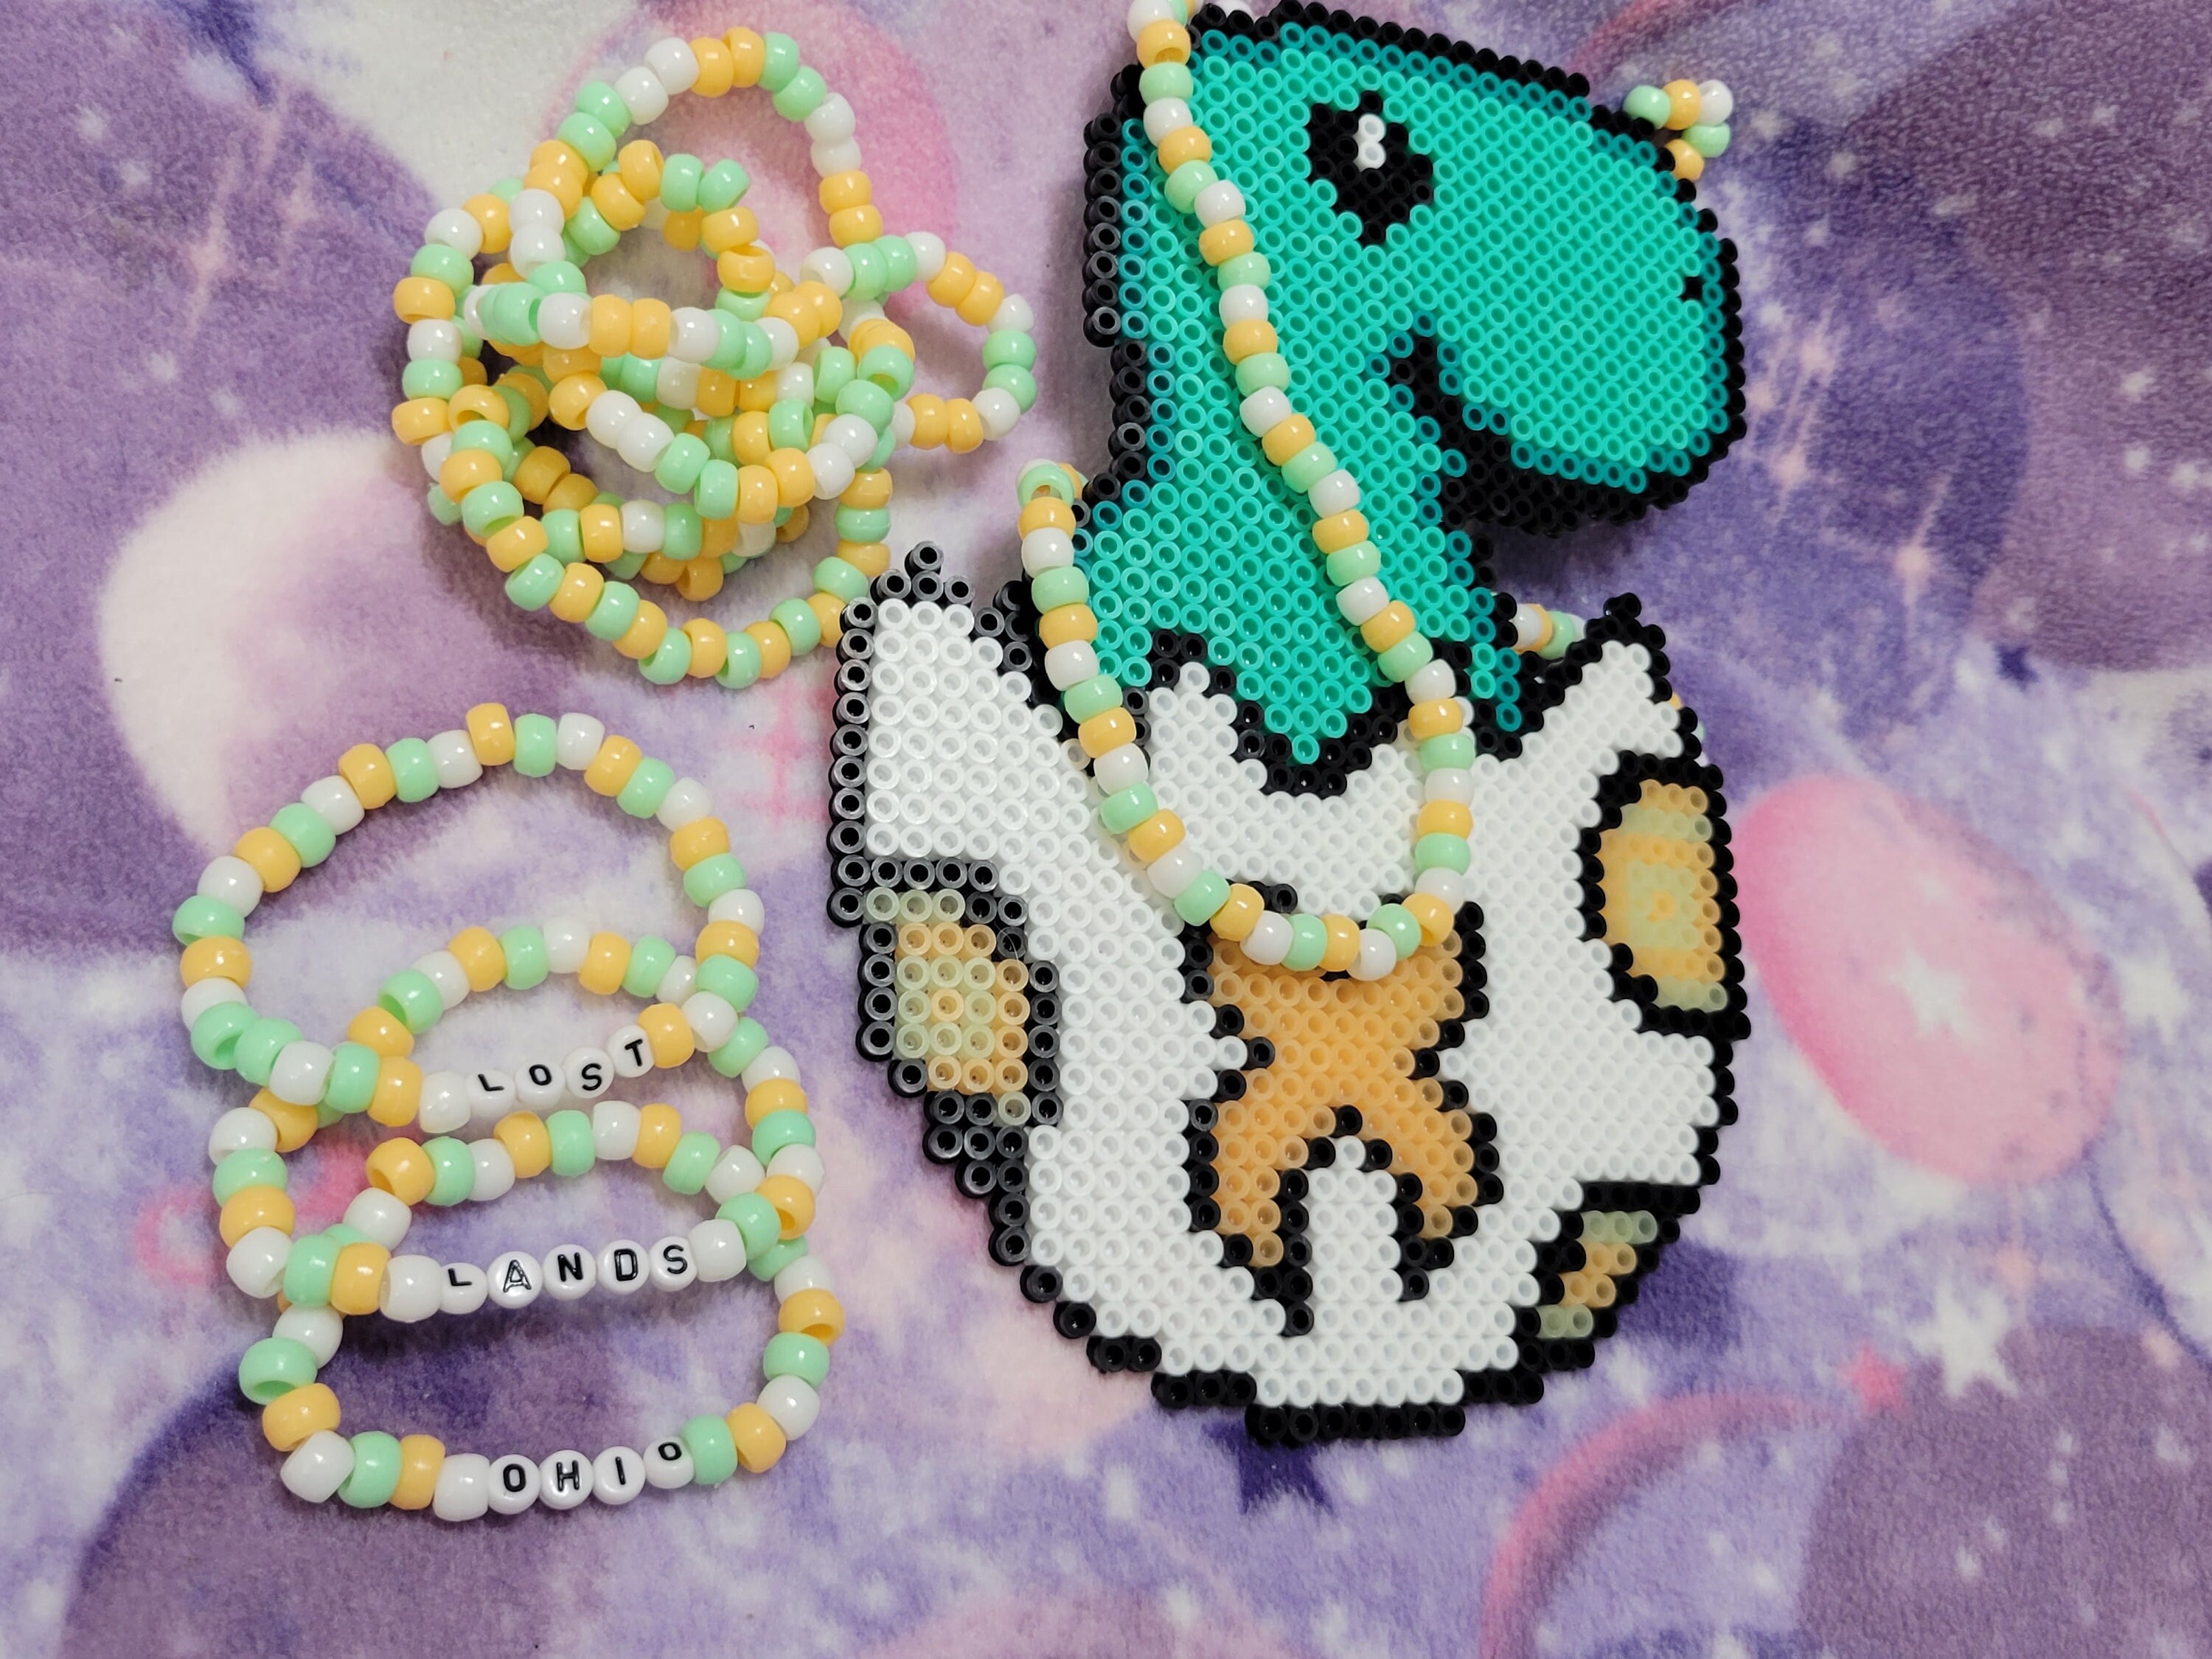 Excision Logo Kandi Charms by Riley G, Download free STL model